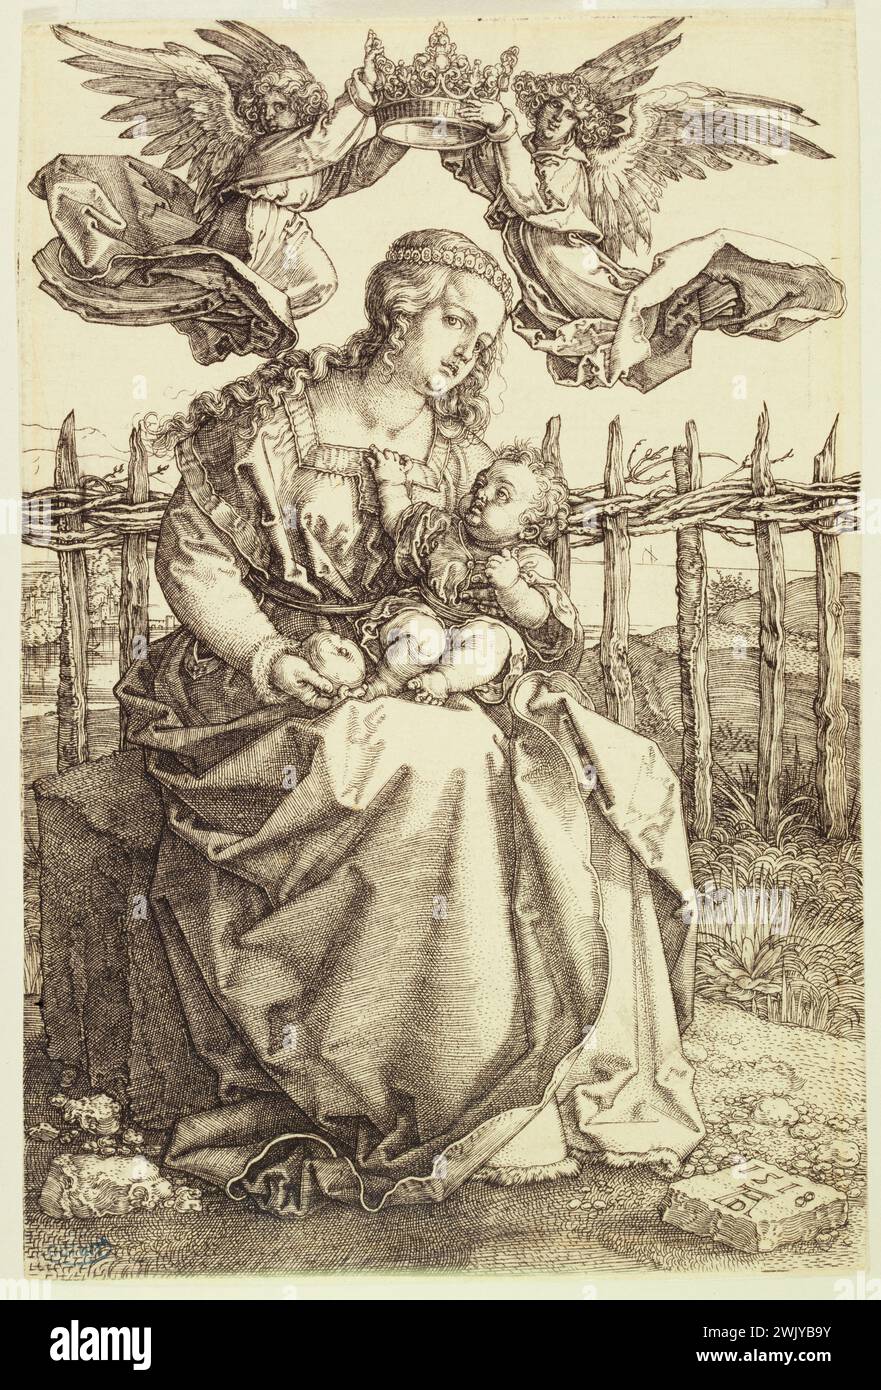 Albrecht Dürer (1471-1528). The Virgin crowned by two angels (Bartsch 39). 1518. Museum of Fine Arts of the city of Paris, Petit Palais. 77214-1 Chretian art, religious art, bible, Christianity, biblical character, holy character, biblical rear, Christian religion, renaissance, biblical scene, religious scene, life Christ, 16th XVI 16th 16th 16th 16 century, engraving Stock Photo